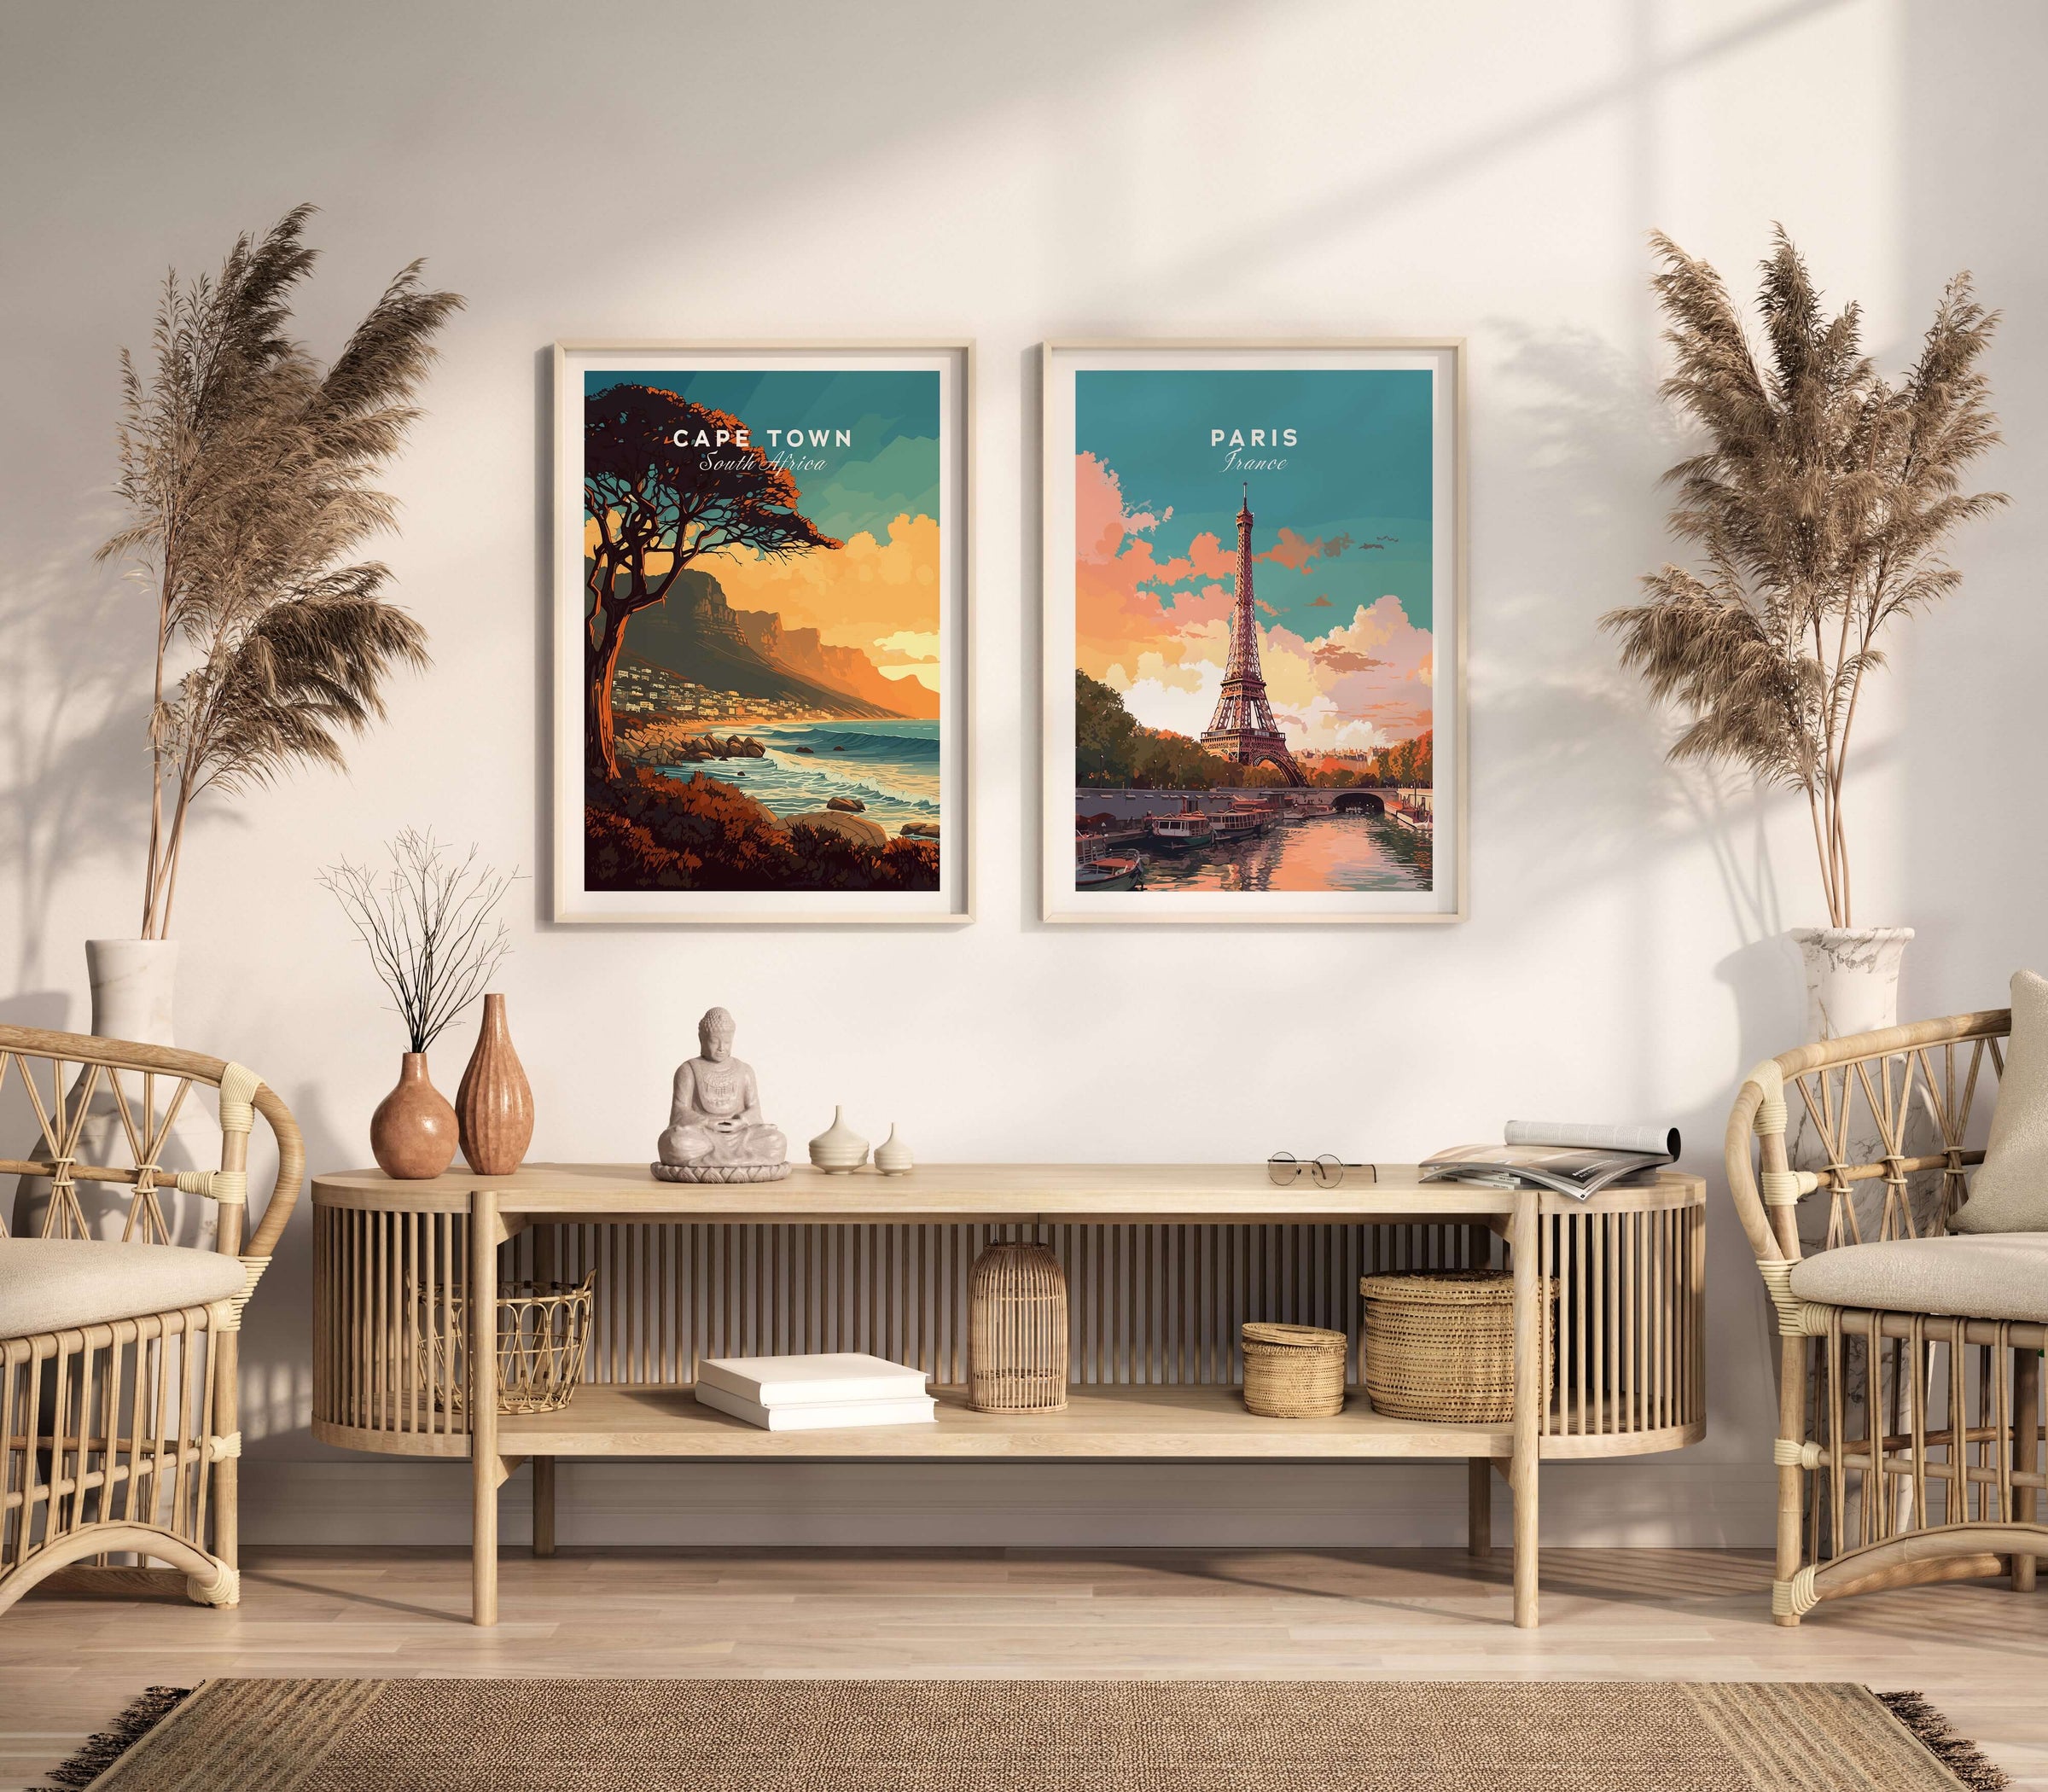 Two travel posters framed in natural wood framed in a lounge setting. The travel prints feature Cape Town and Paris with the Eiffel Tower at sunset